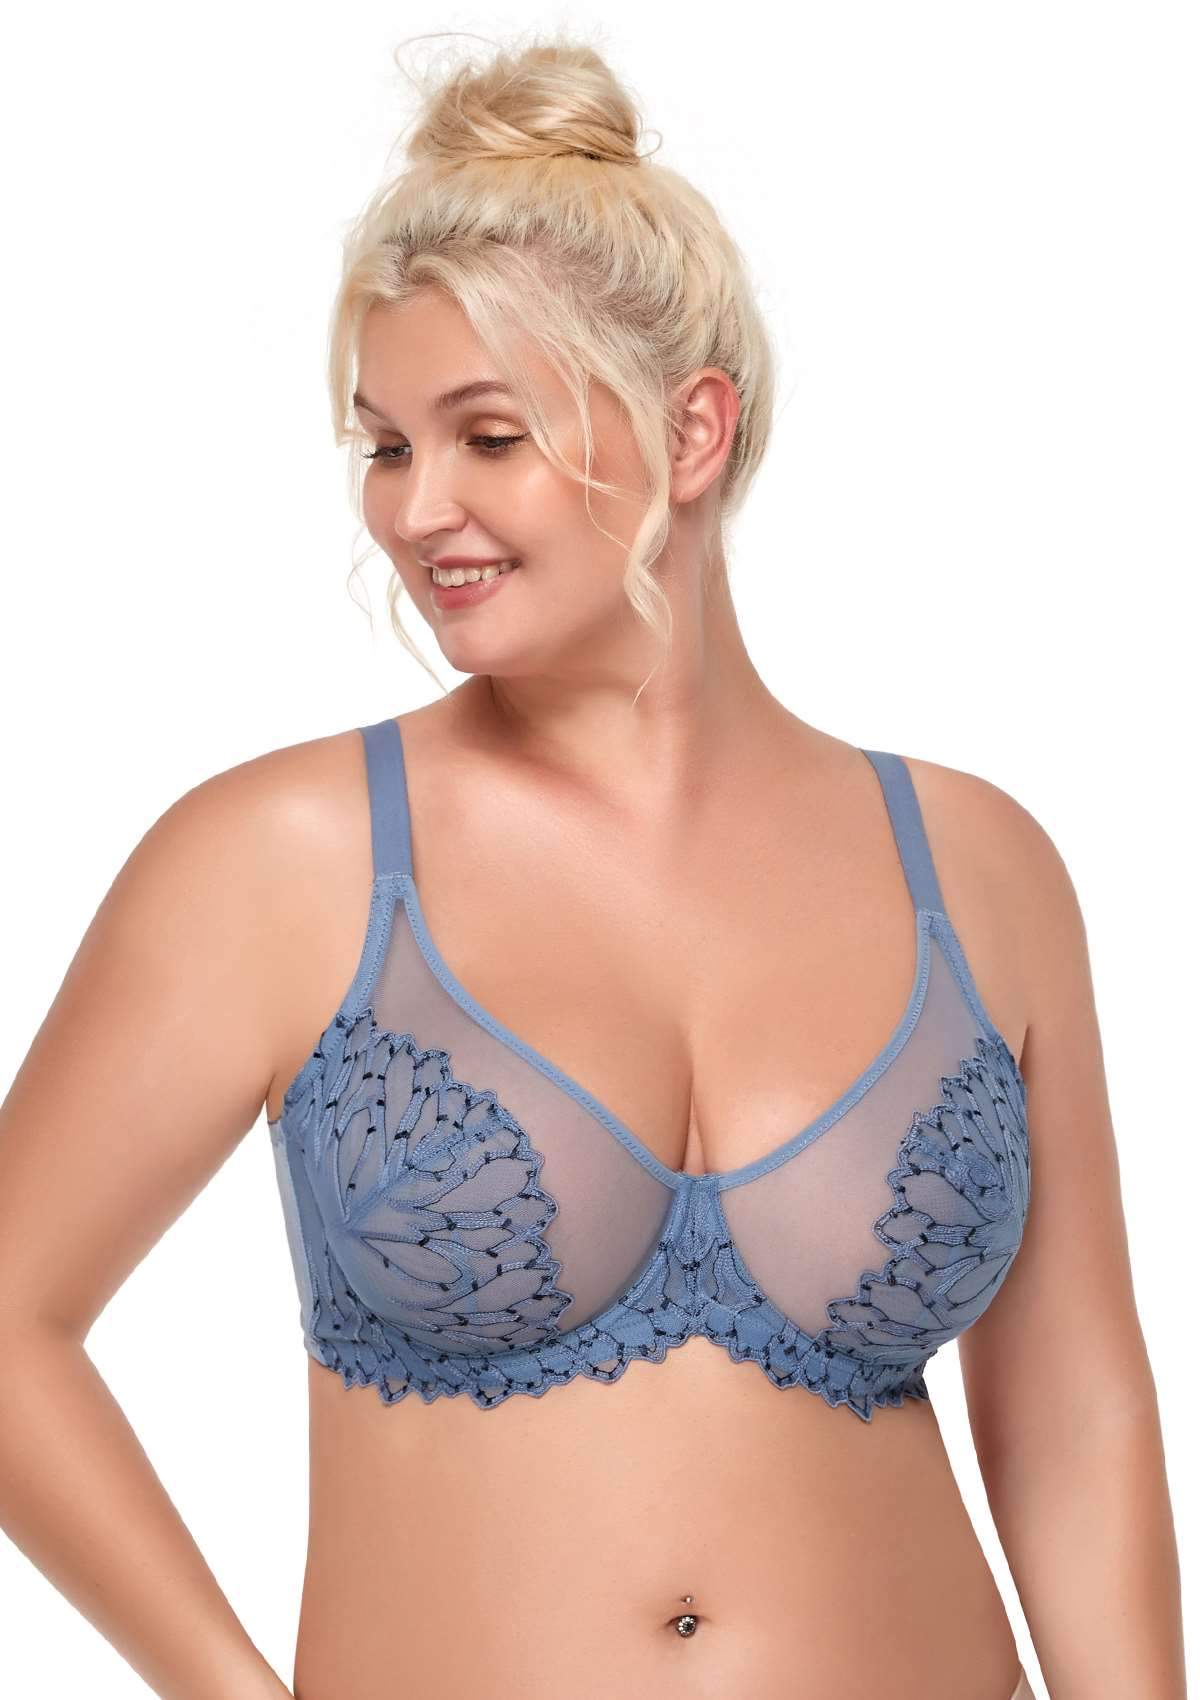 HSIA Chrysanthemum Plus Size Lace Bra: Back Support Bra For Posture - Light Pink / 32 / C